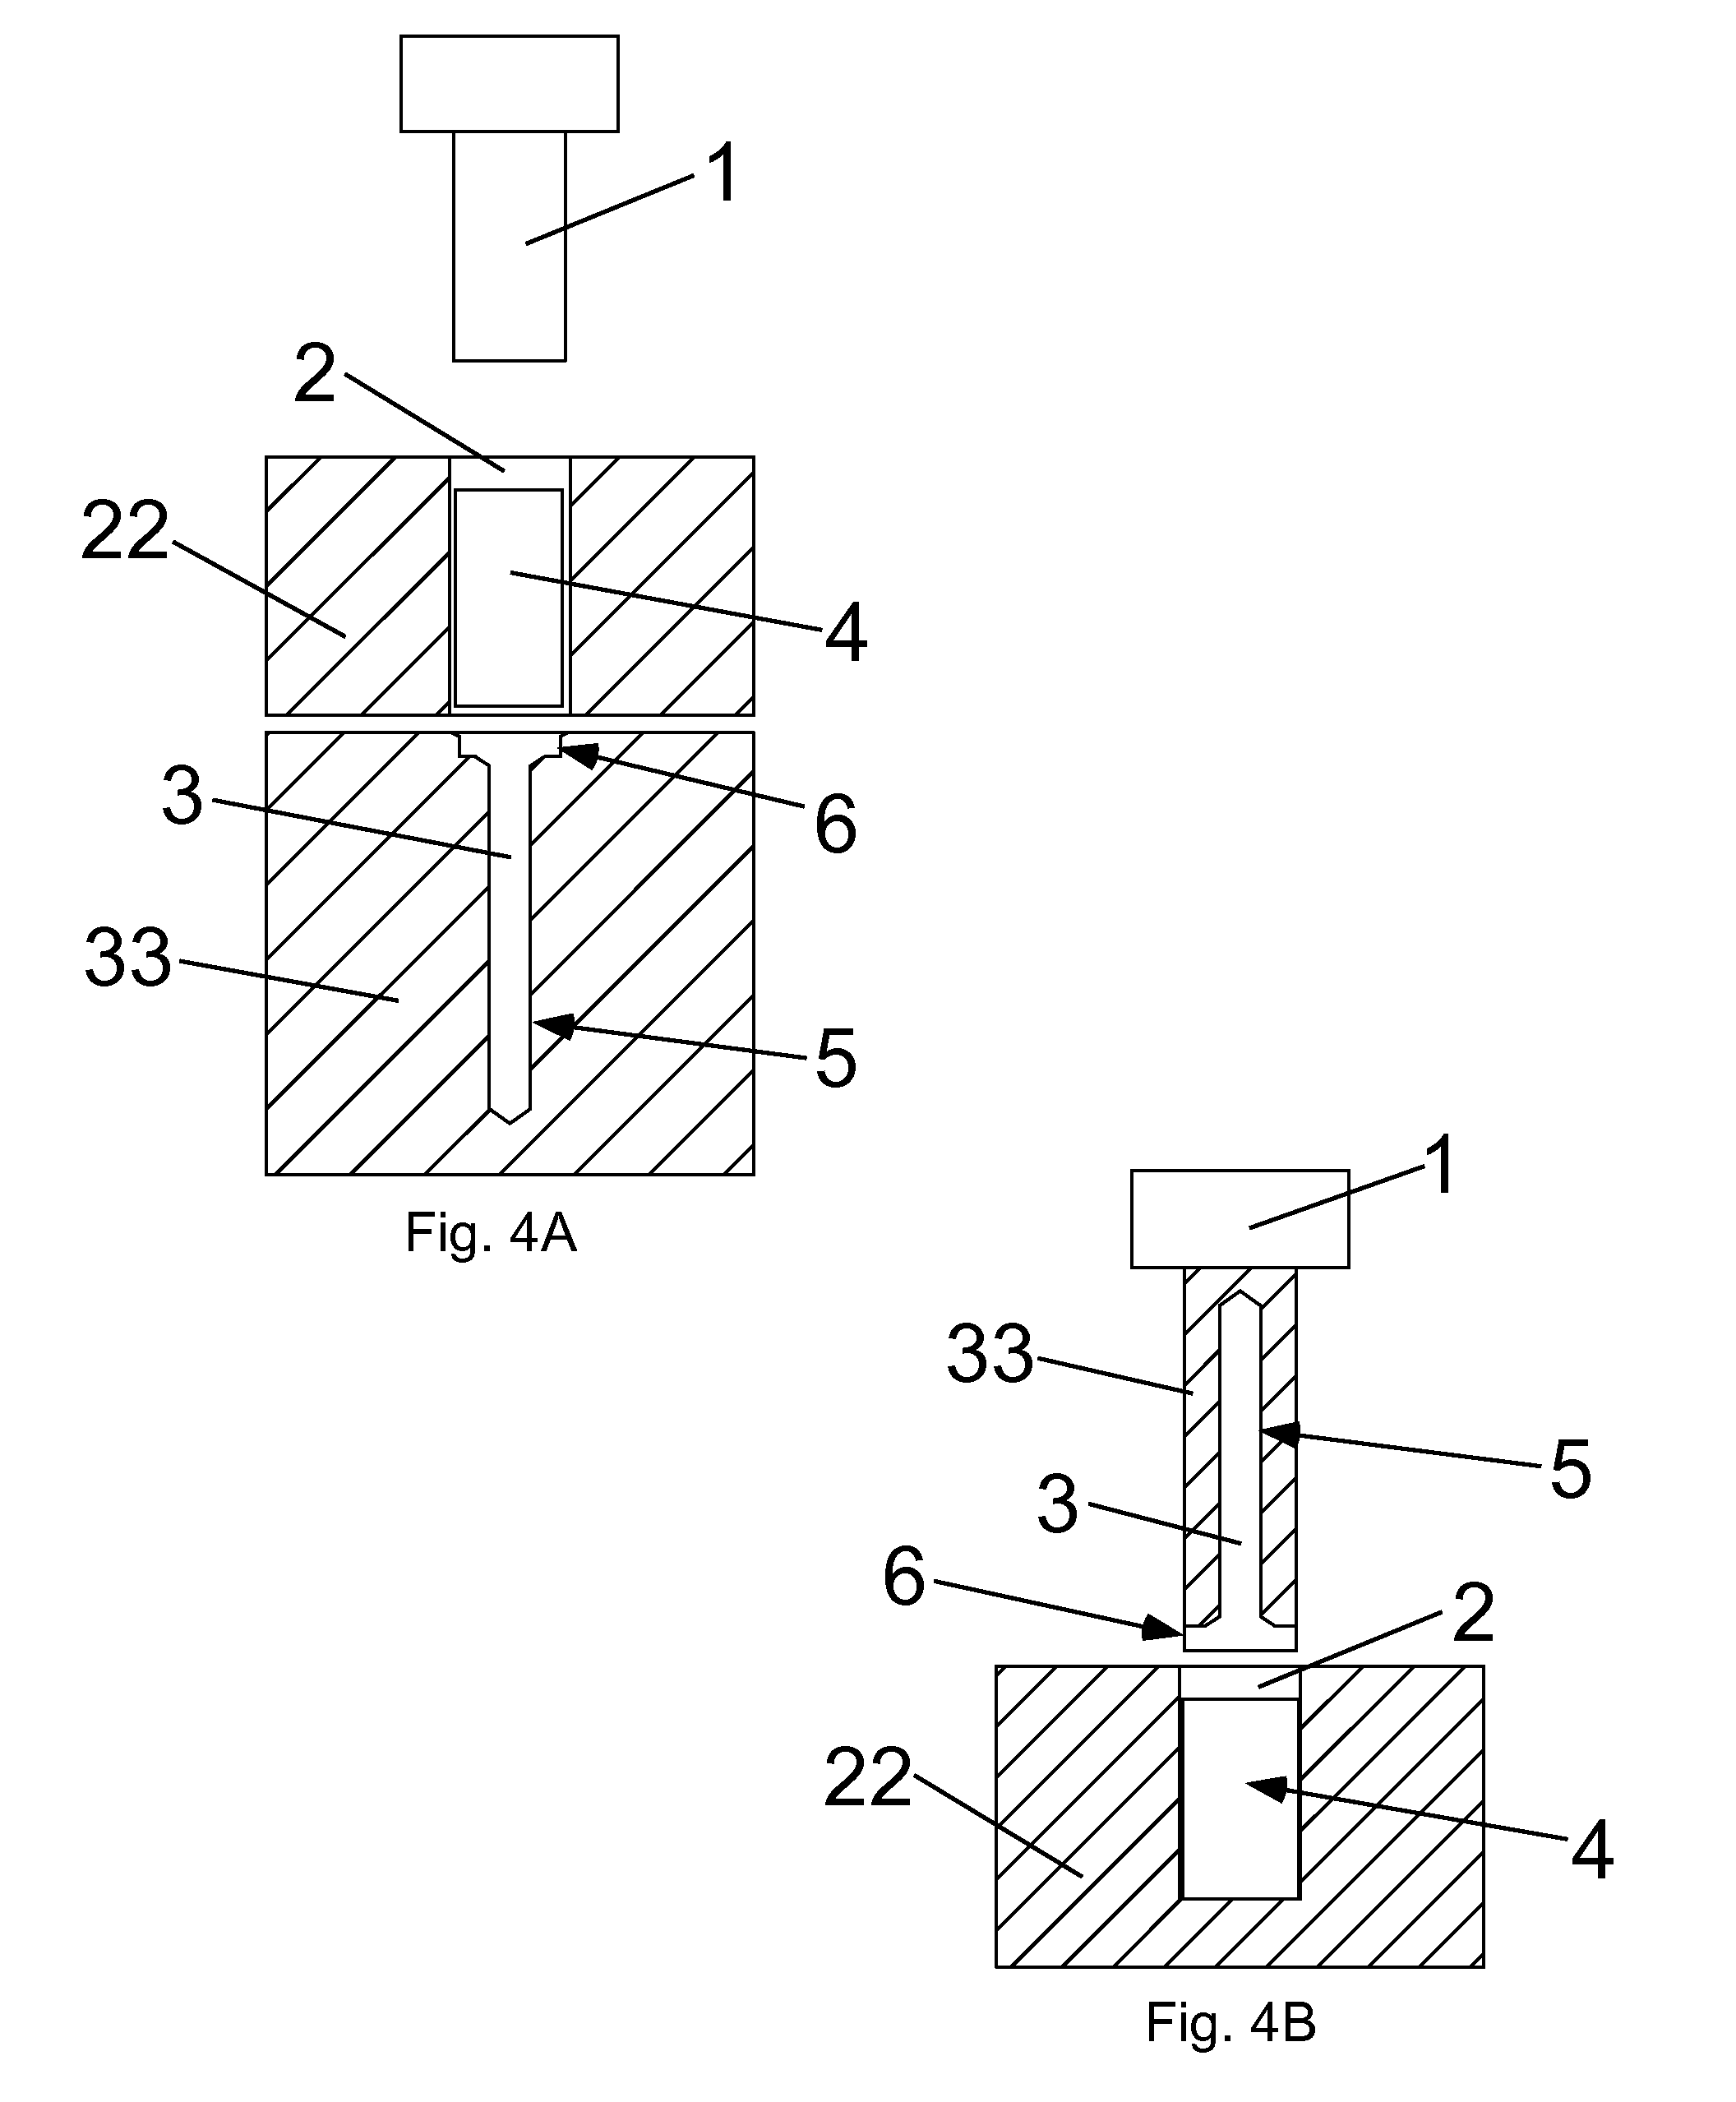 Oriented polymer implantable device and process for making same